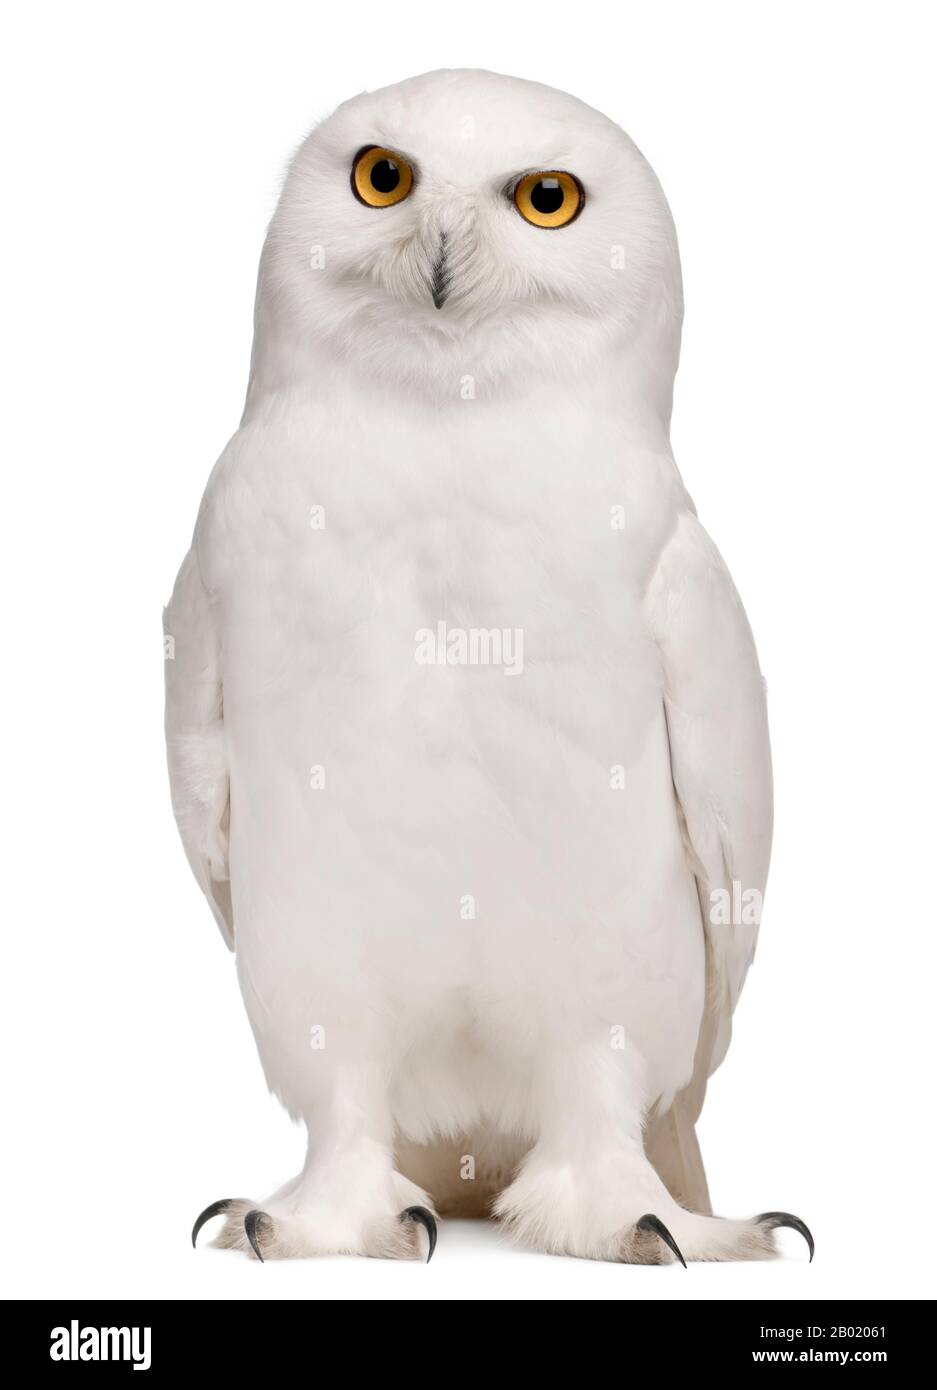 Male Snowy Owl, Bubo scandiacus, 8 years old, in front of white background Stock Photo